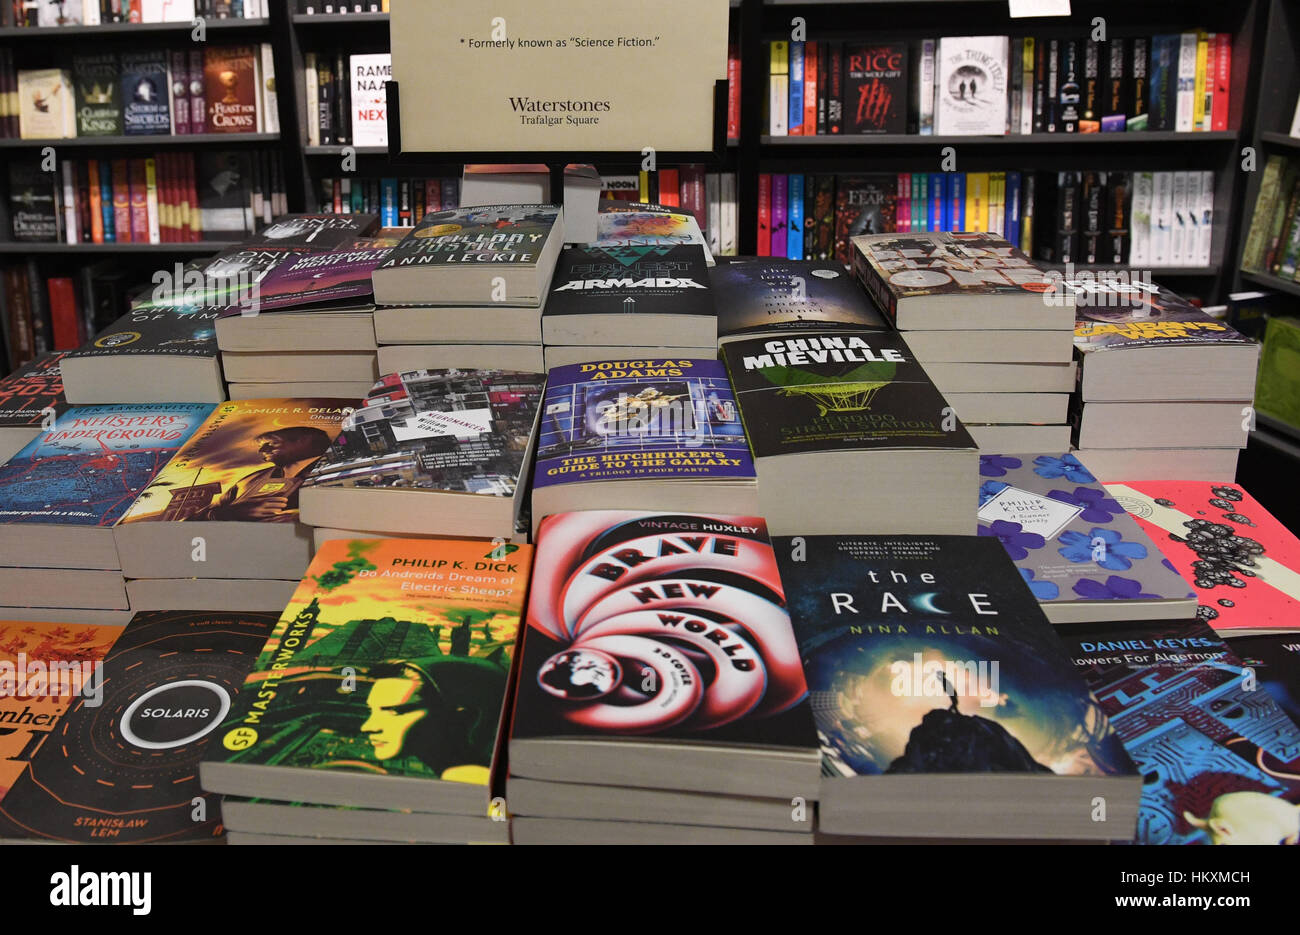 Science fiction titles on display at the Waterstones book shop in Trafalgar Square, London. Stock Photo